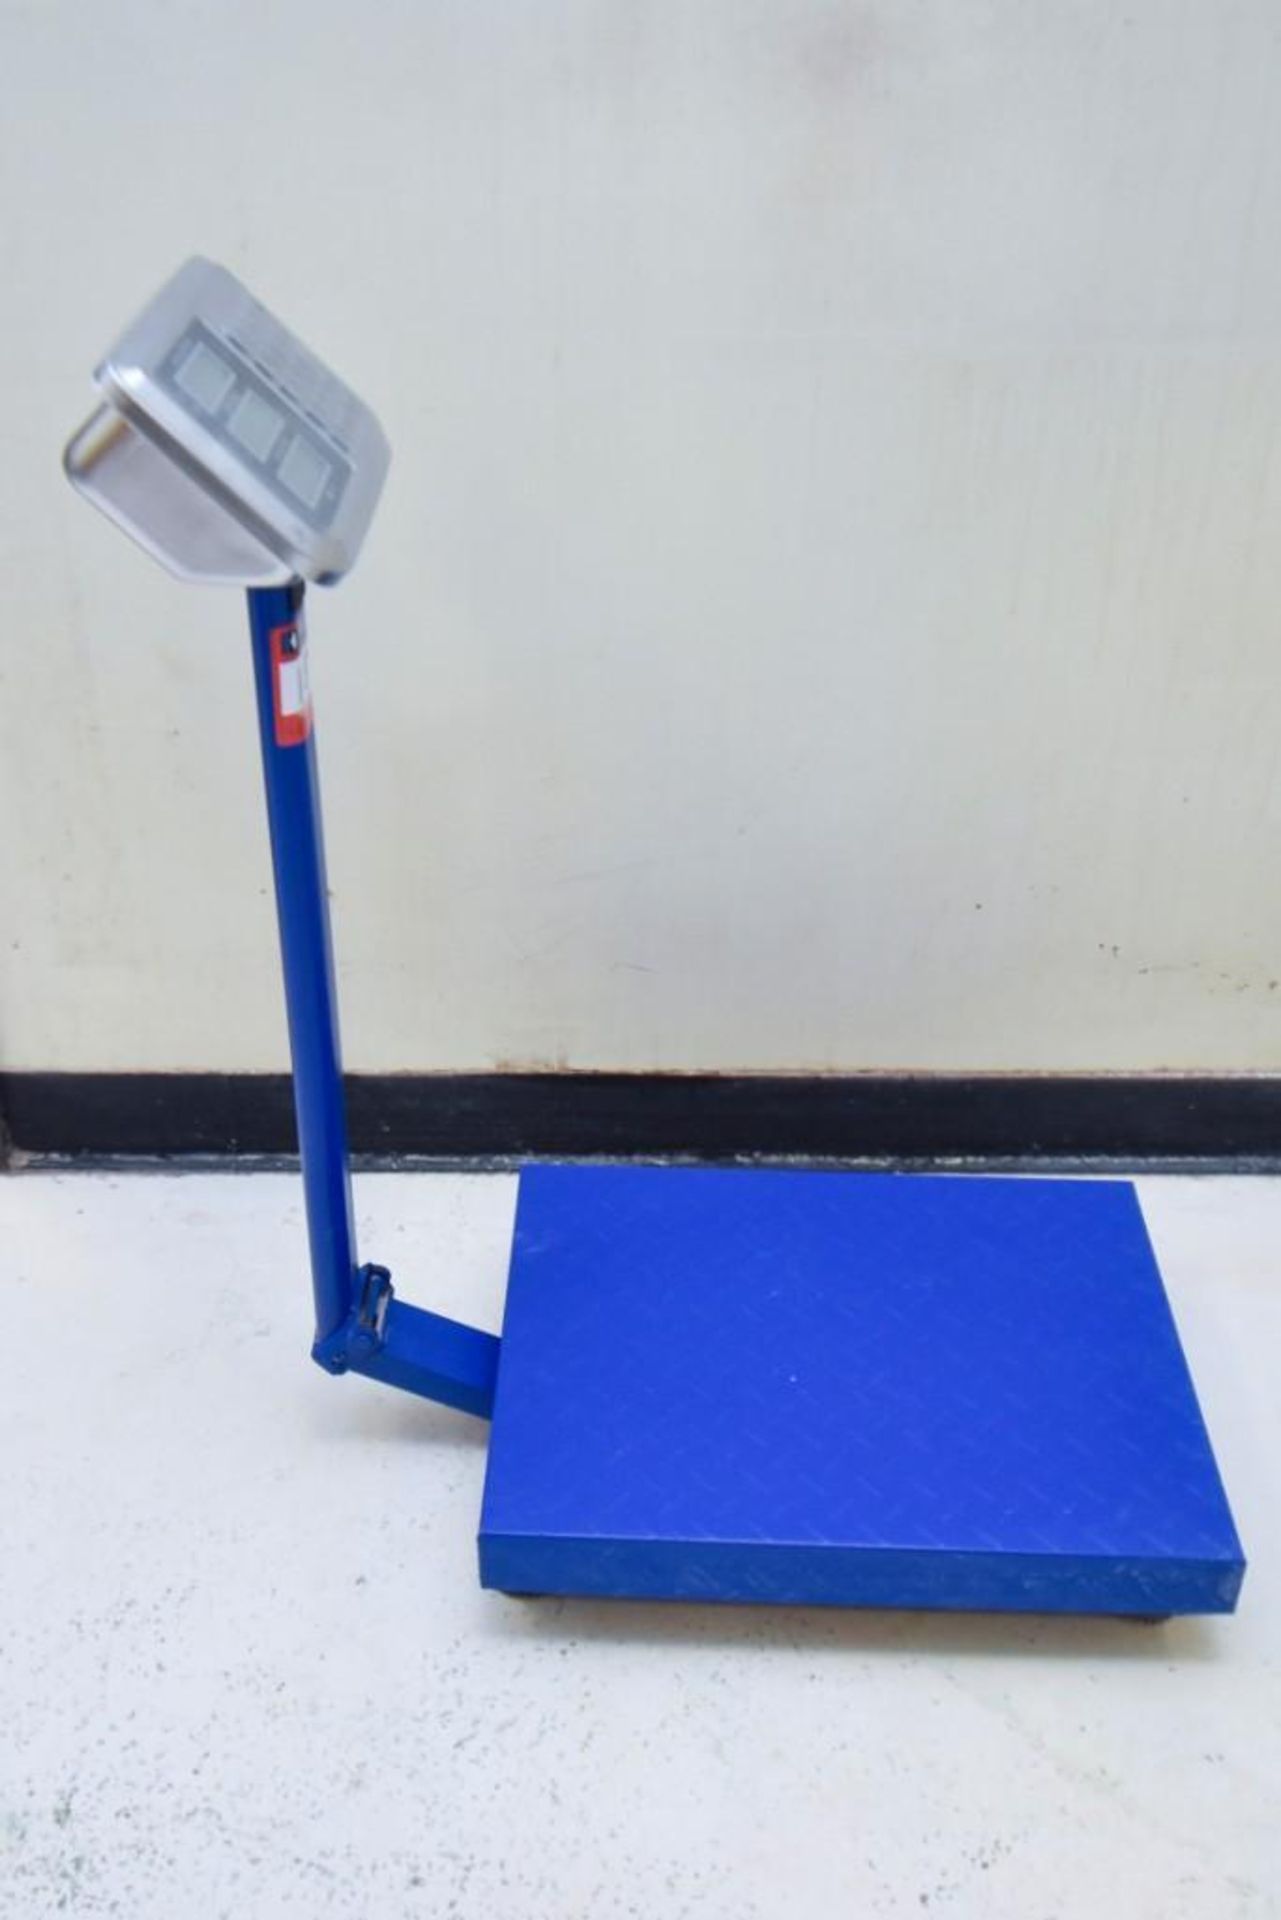 Tuffiom Blue Stand TCS Electronic Scale - Image 4 of 6